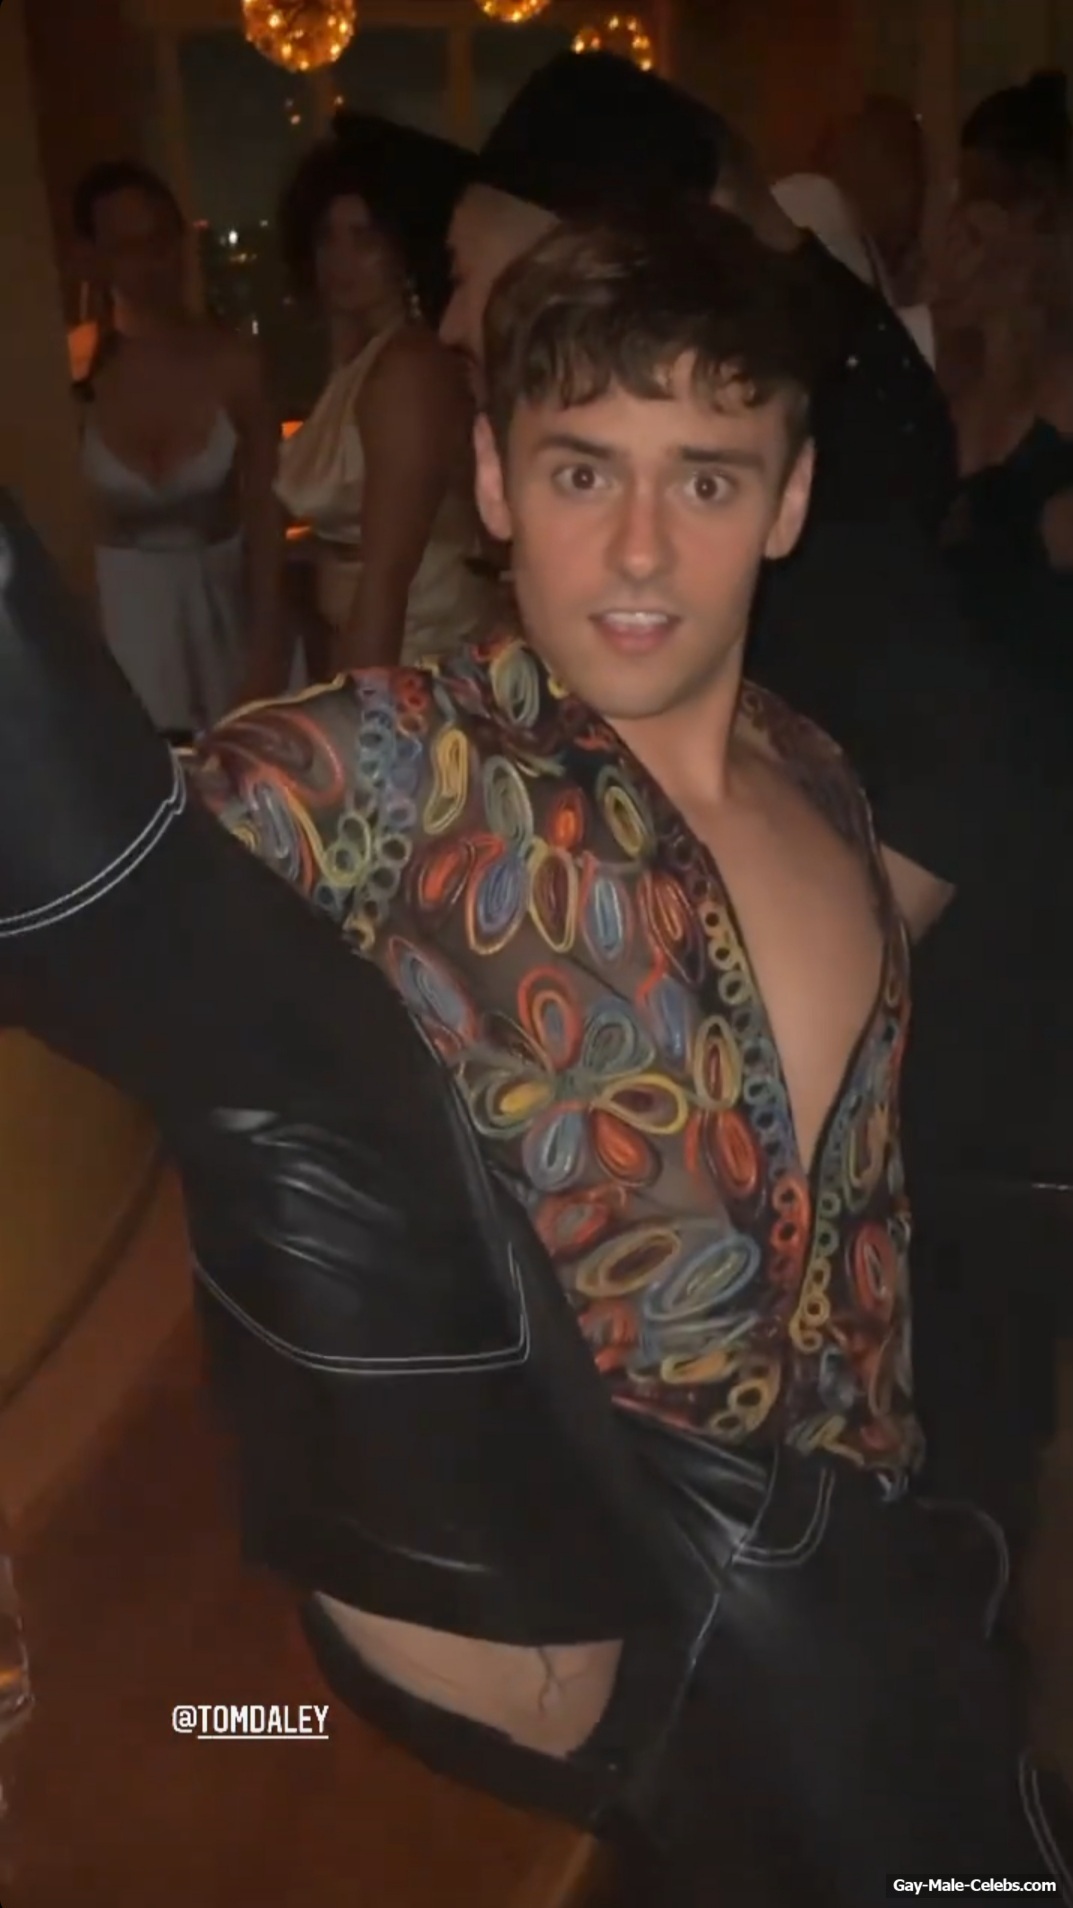 Tom Daley Drunk And Tears His Pants